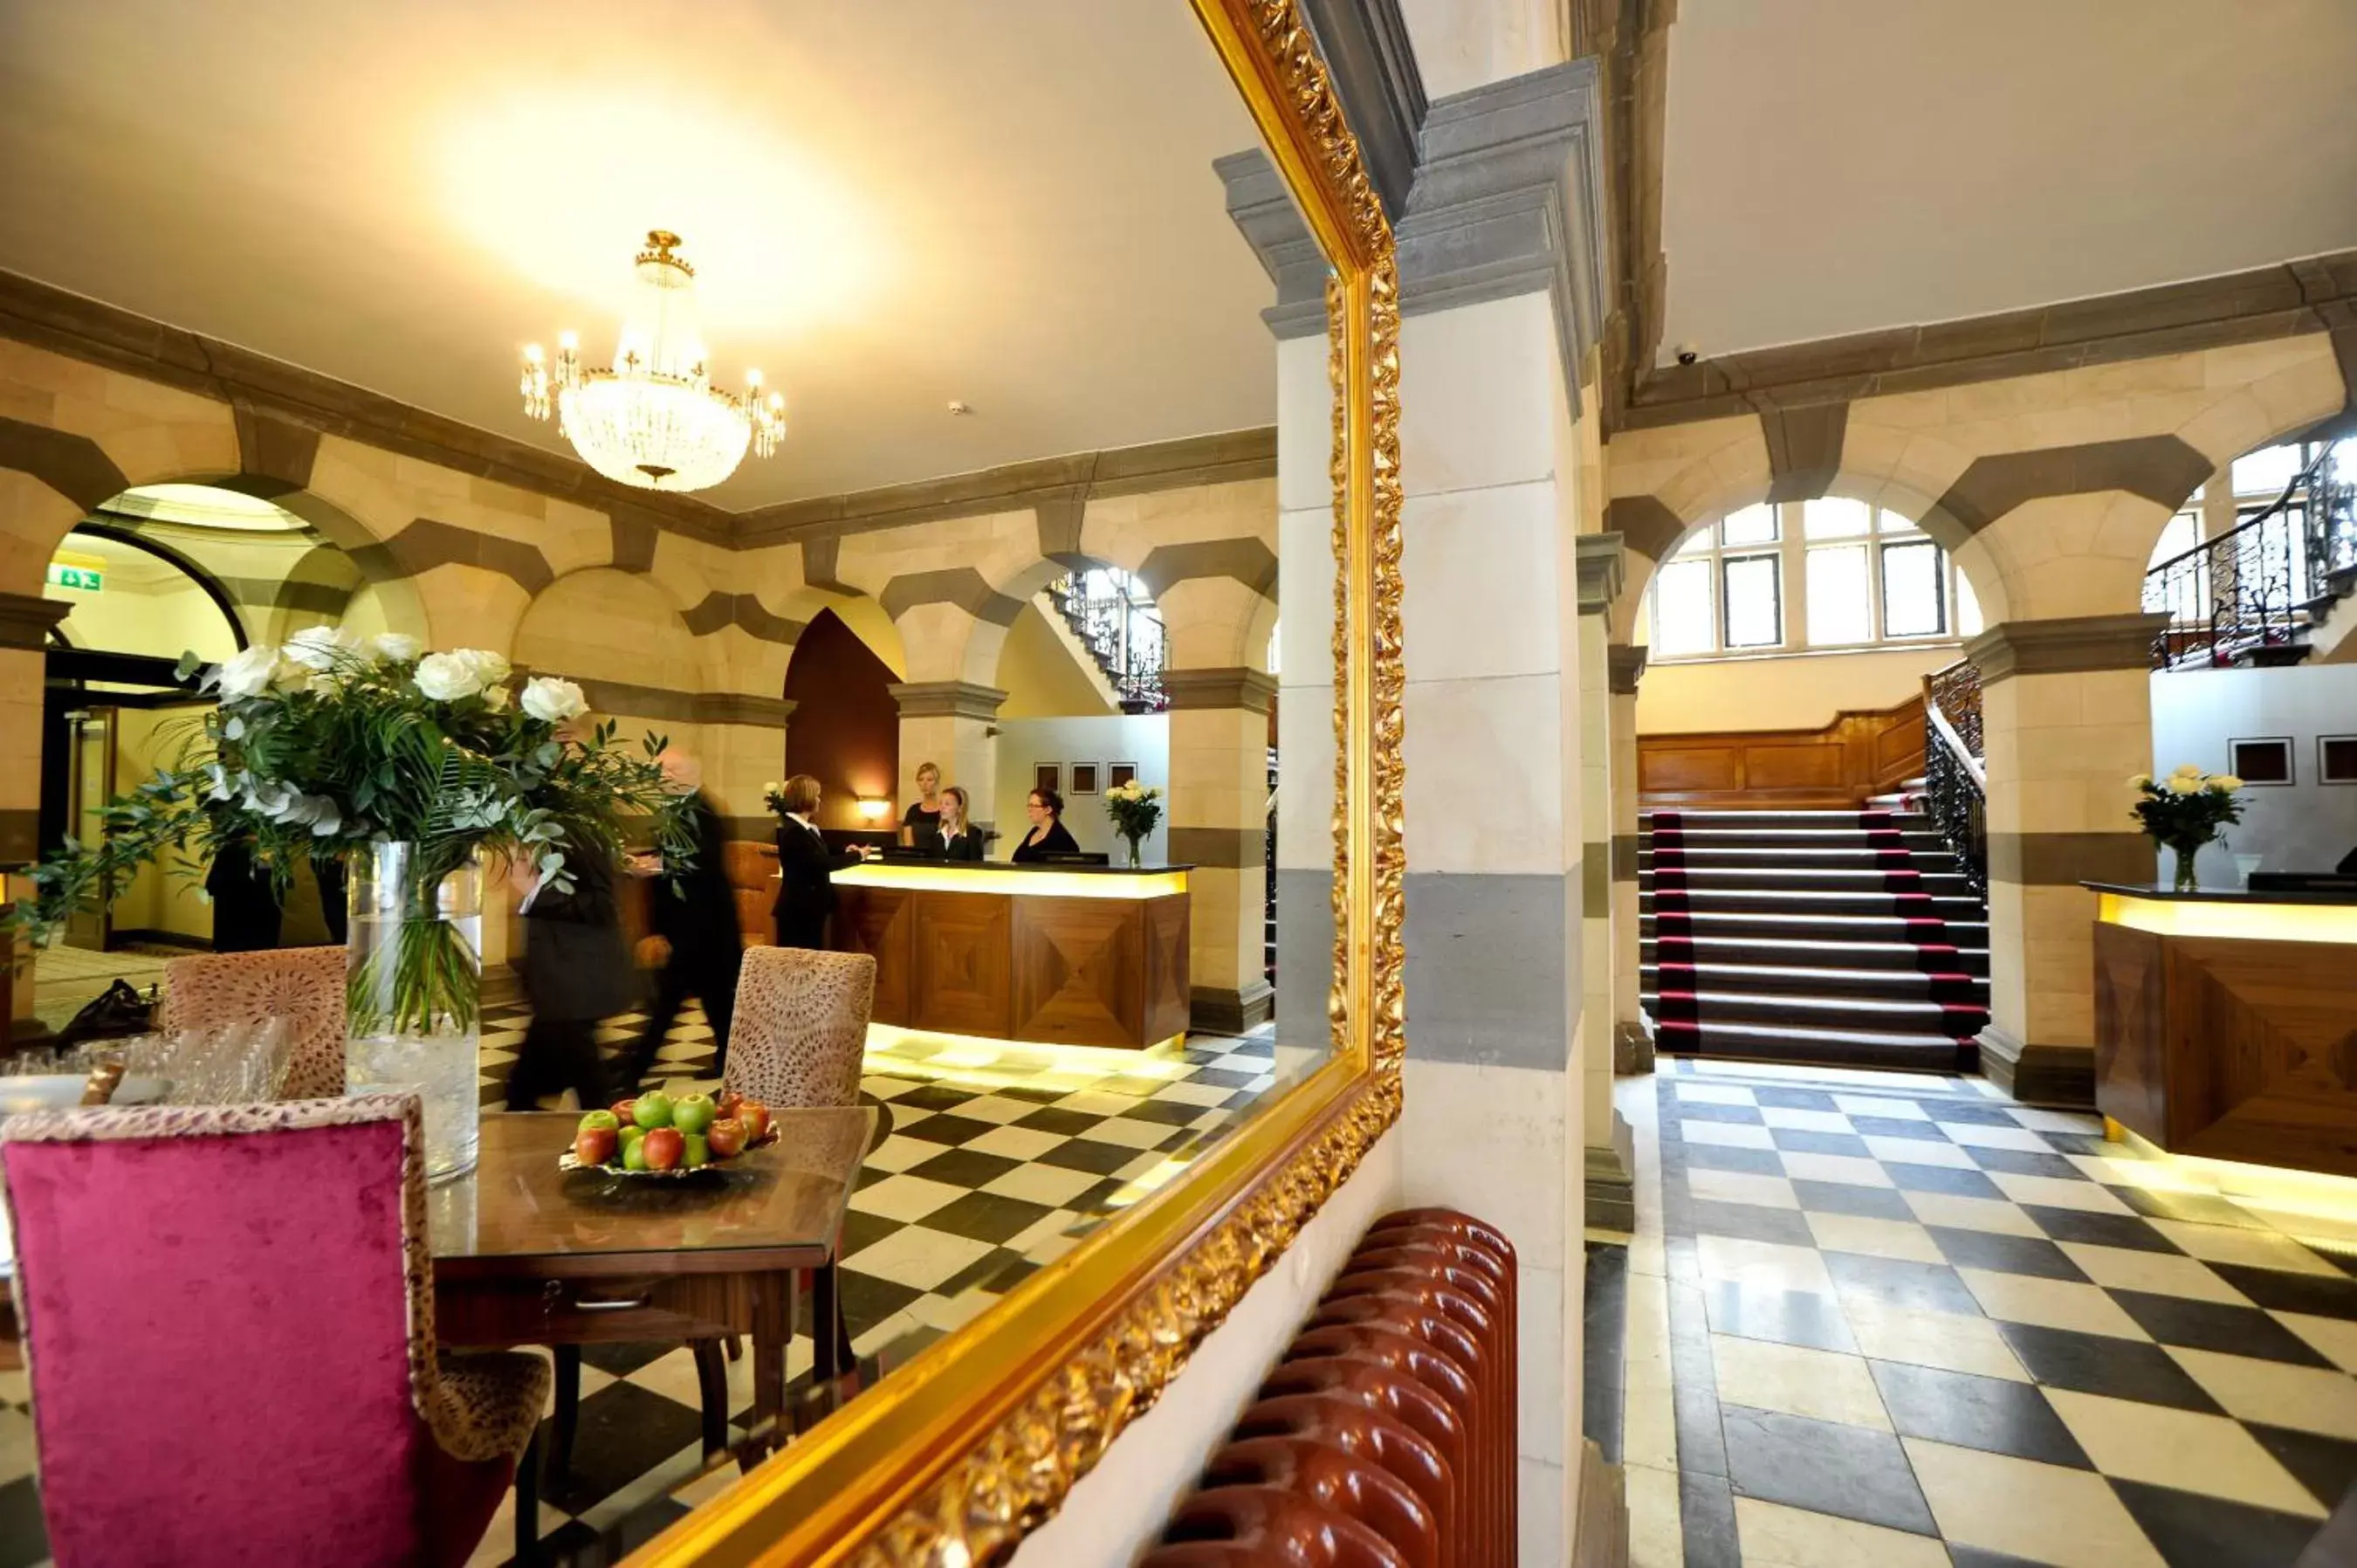 Lobby or reception in The Grand, York